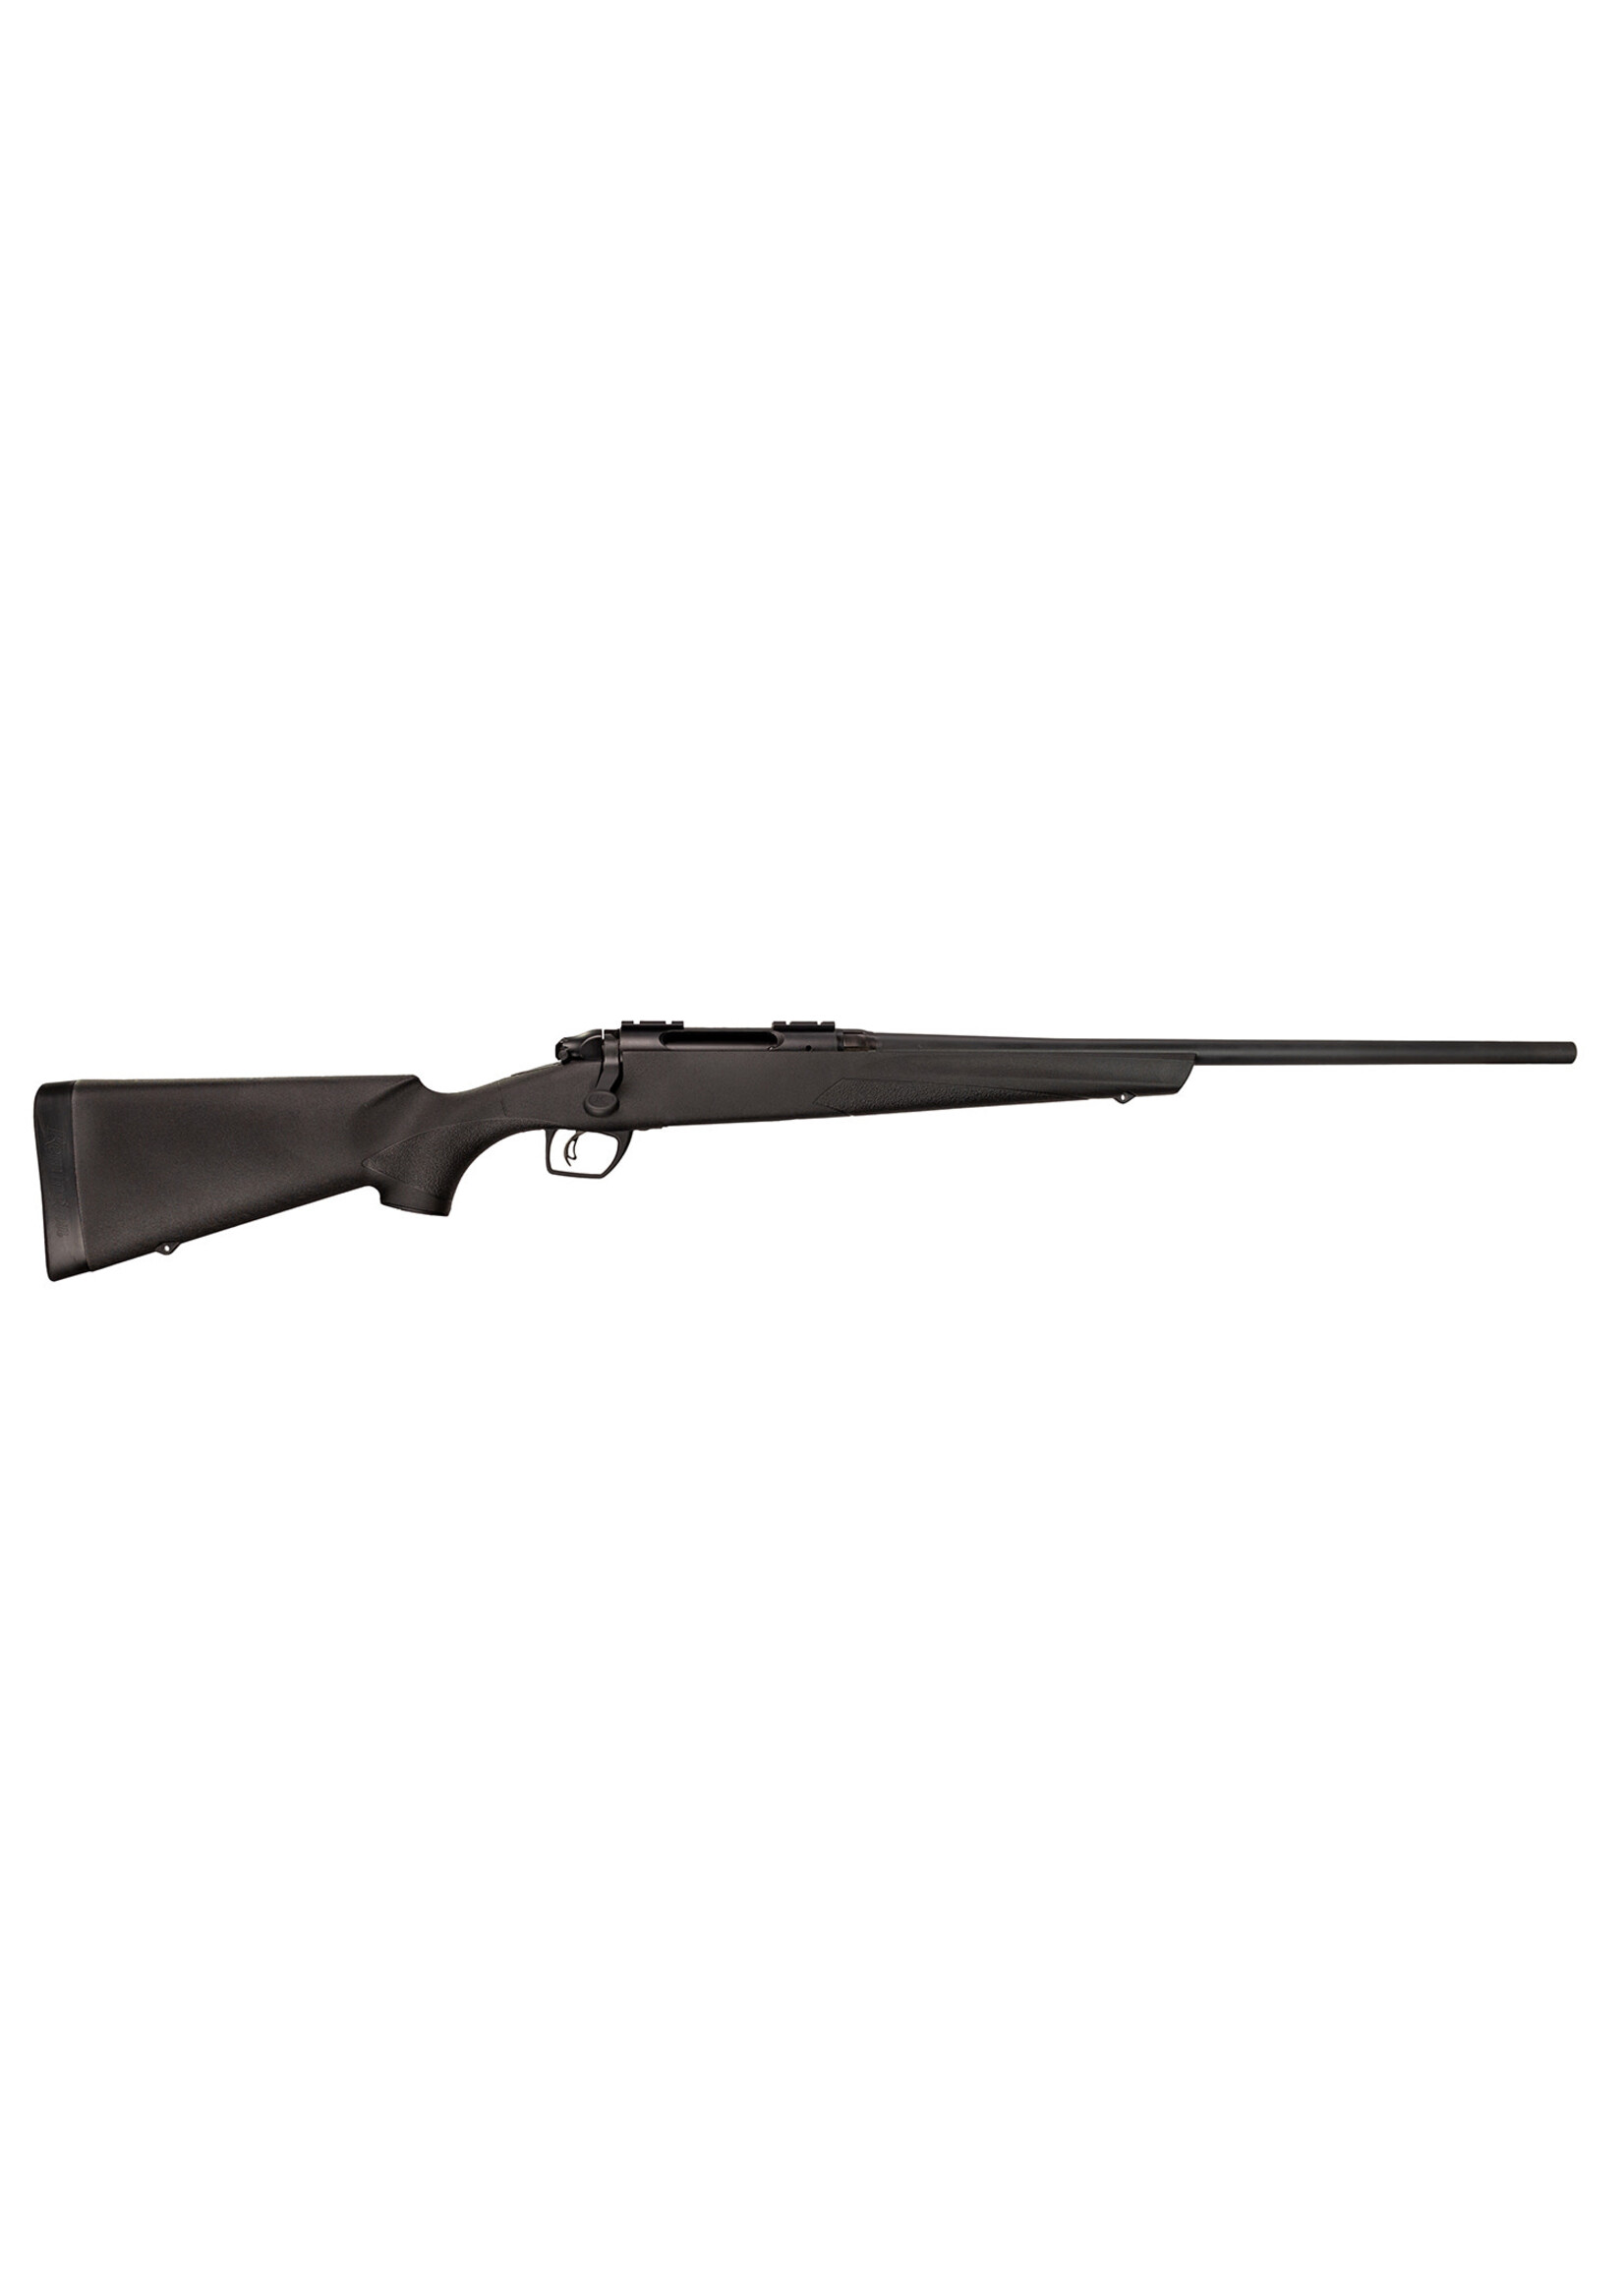 Remington Remington Firearms (New) R85840 700 SPS Full Size 223 Rem 4+1 26" Matte Black Steel Barrel & Drilled & Tapped Carbon Steel Receiver, Black Synthetic Stock